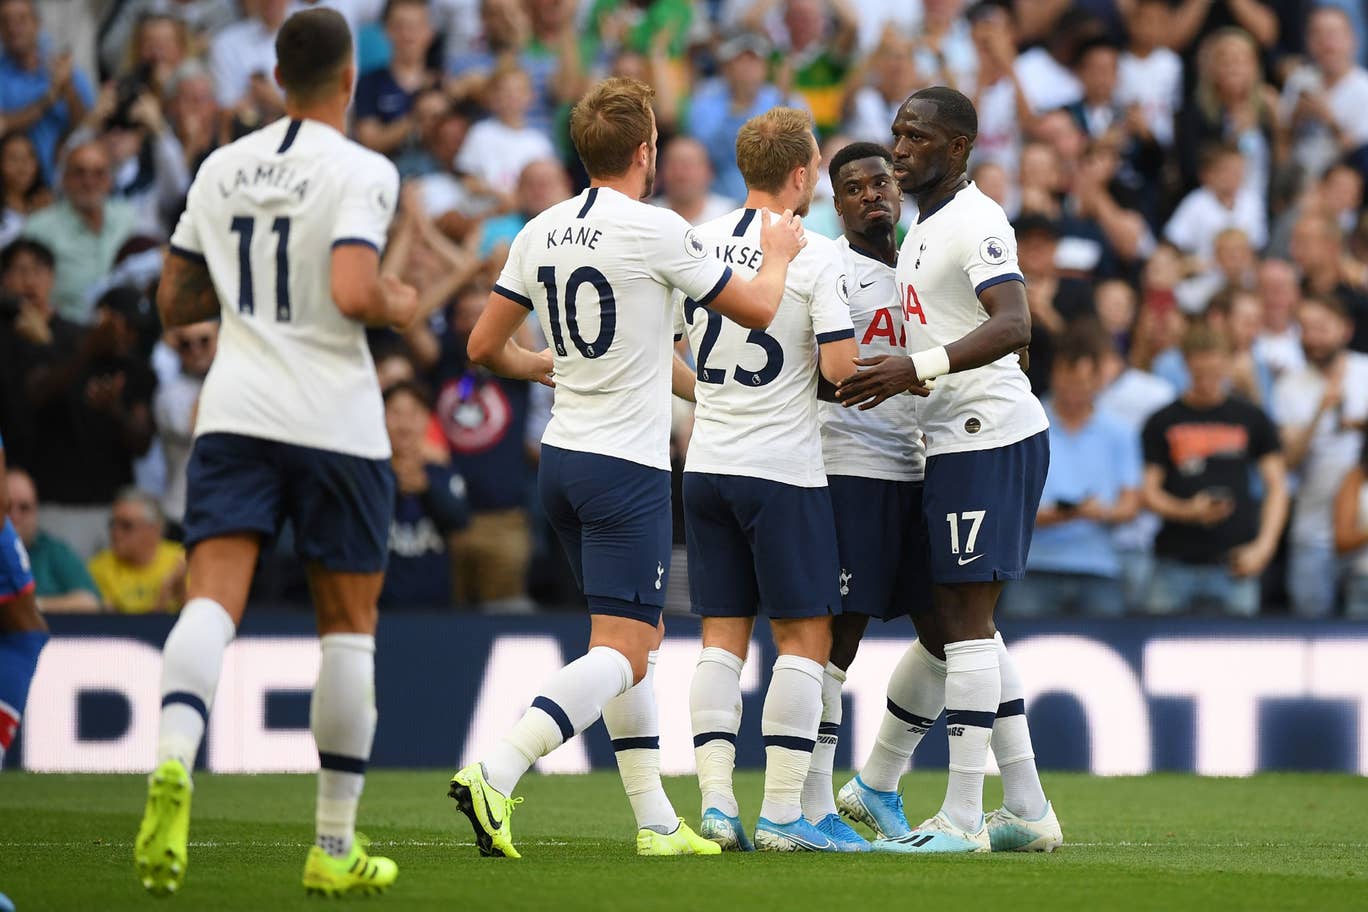 Tottenham players celebrate after scoring. (Getty Images)